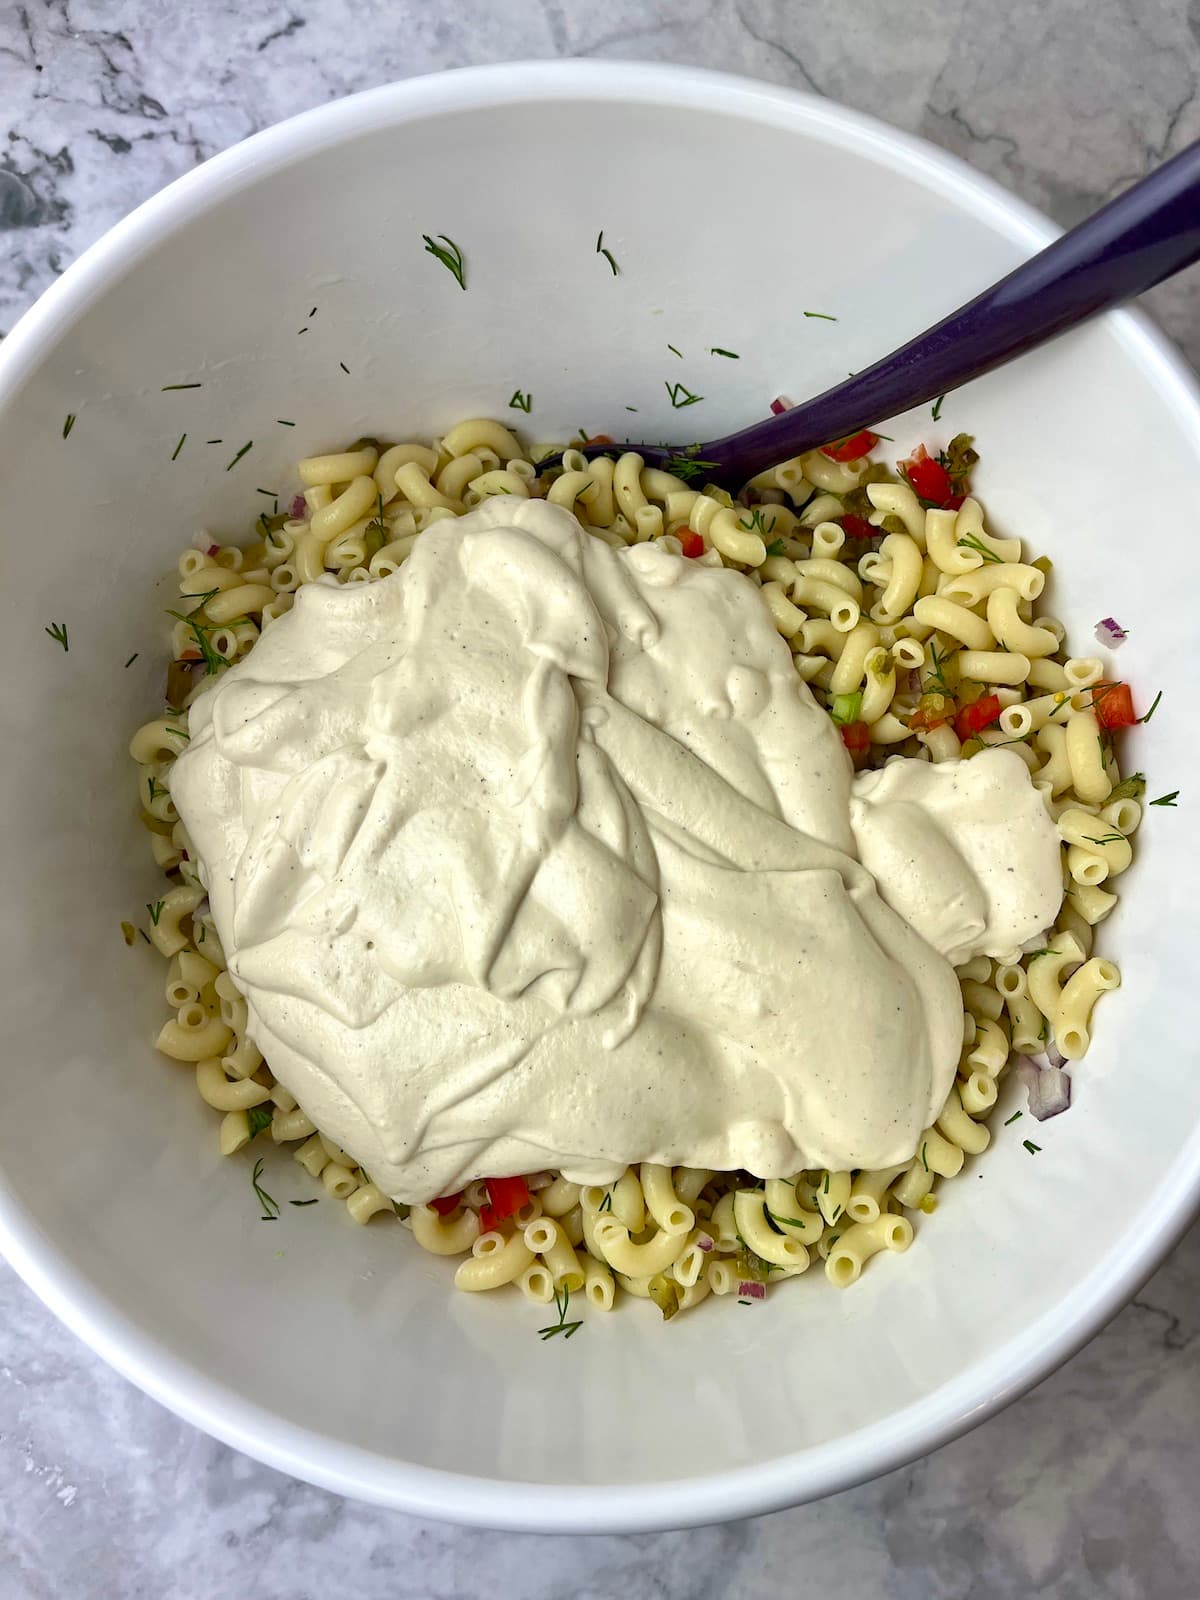 A bowl of macaroni salad ingredients topped with a thick creamy vegan dressing.